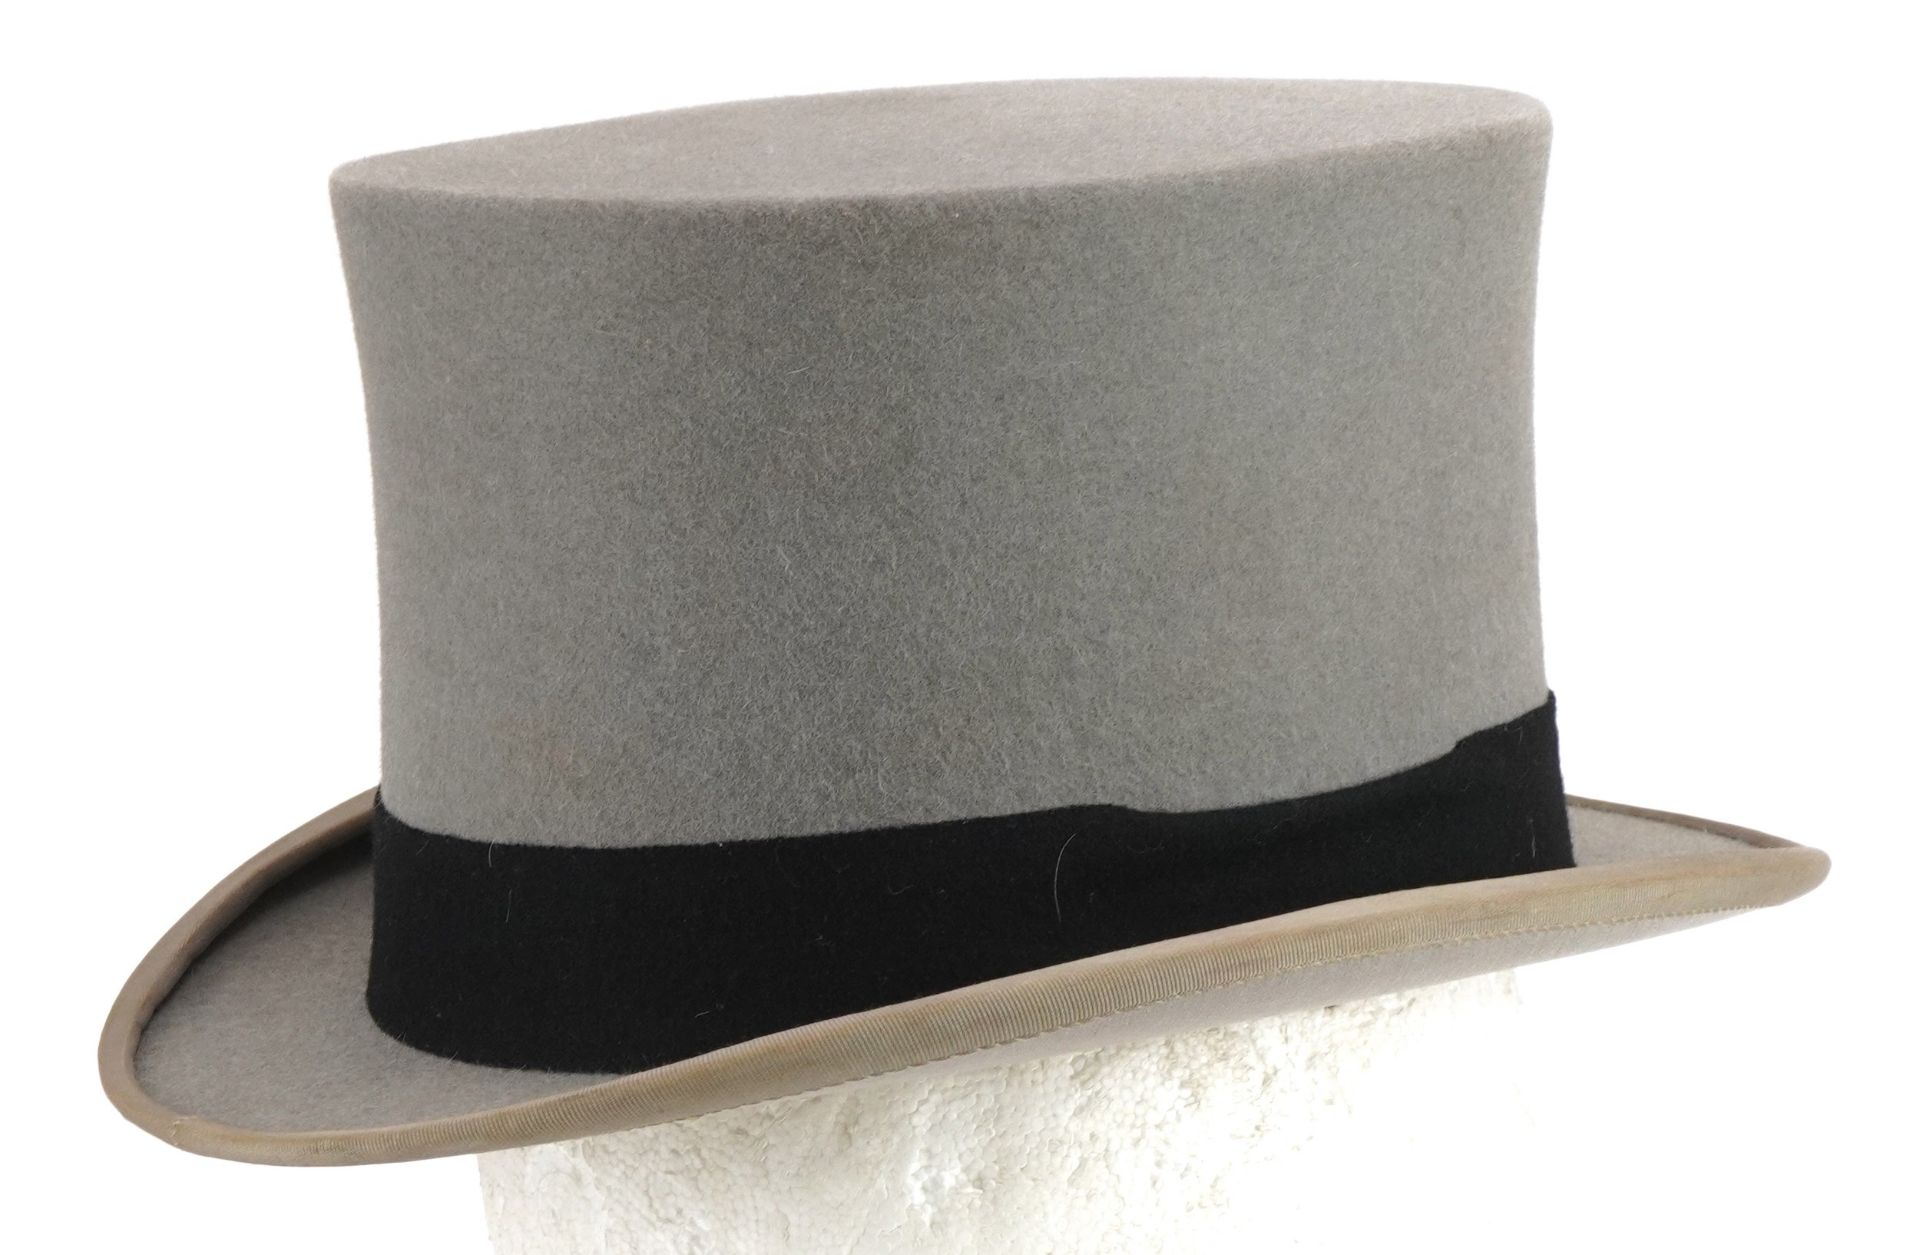 Scott & Co top hat housed in a brown leatherette travel box, the top hat interior size 21cm x 17cm : - Bild 6 aus 7